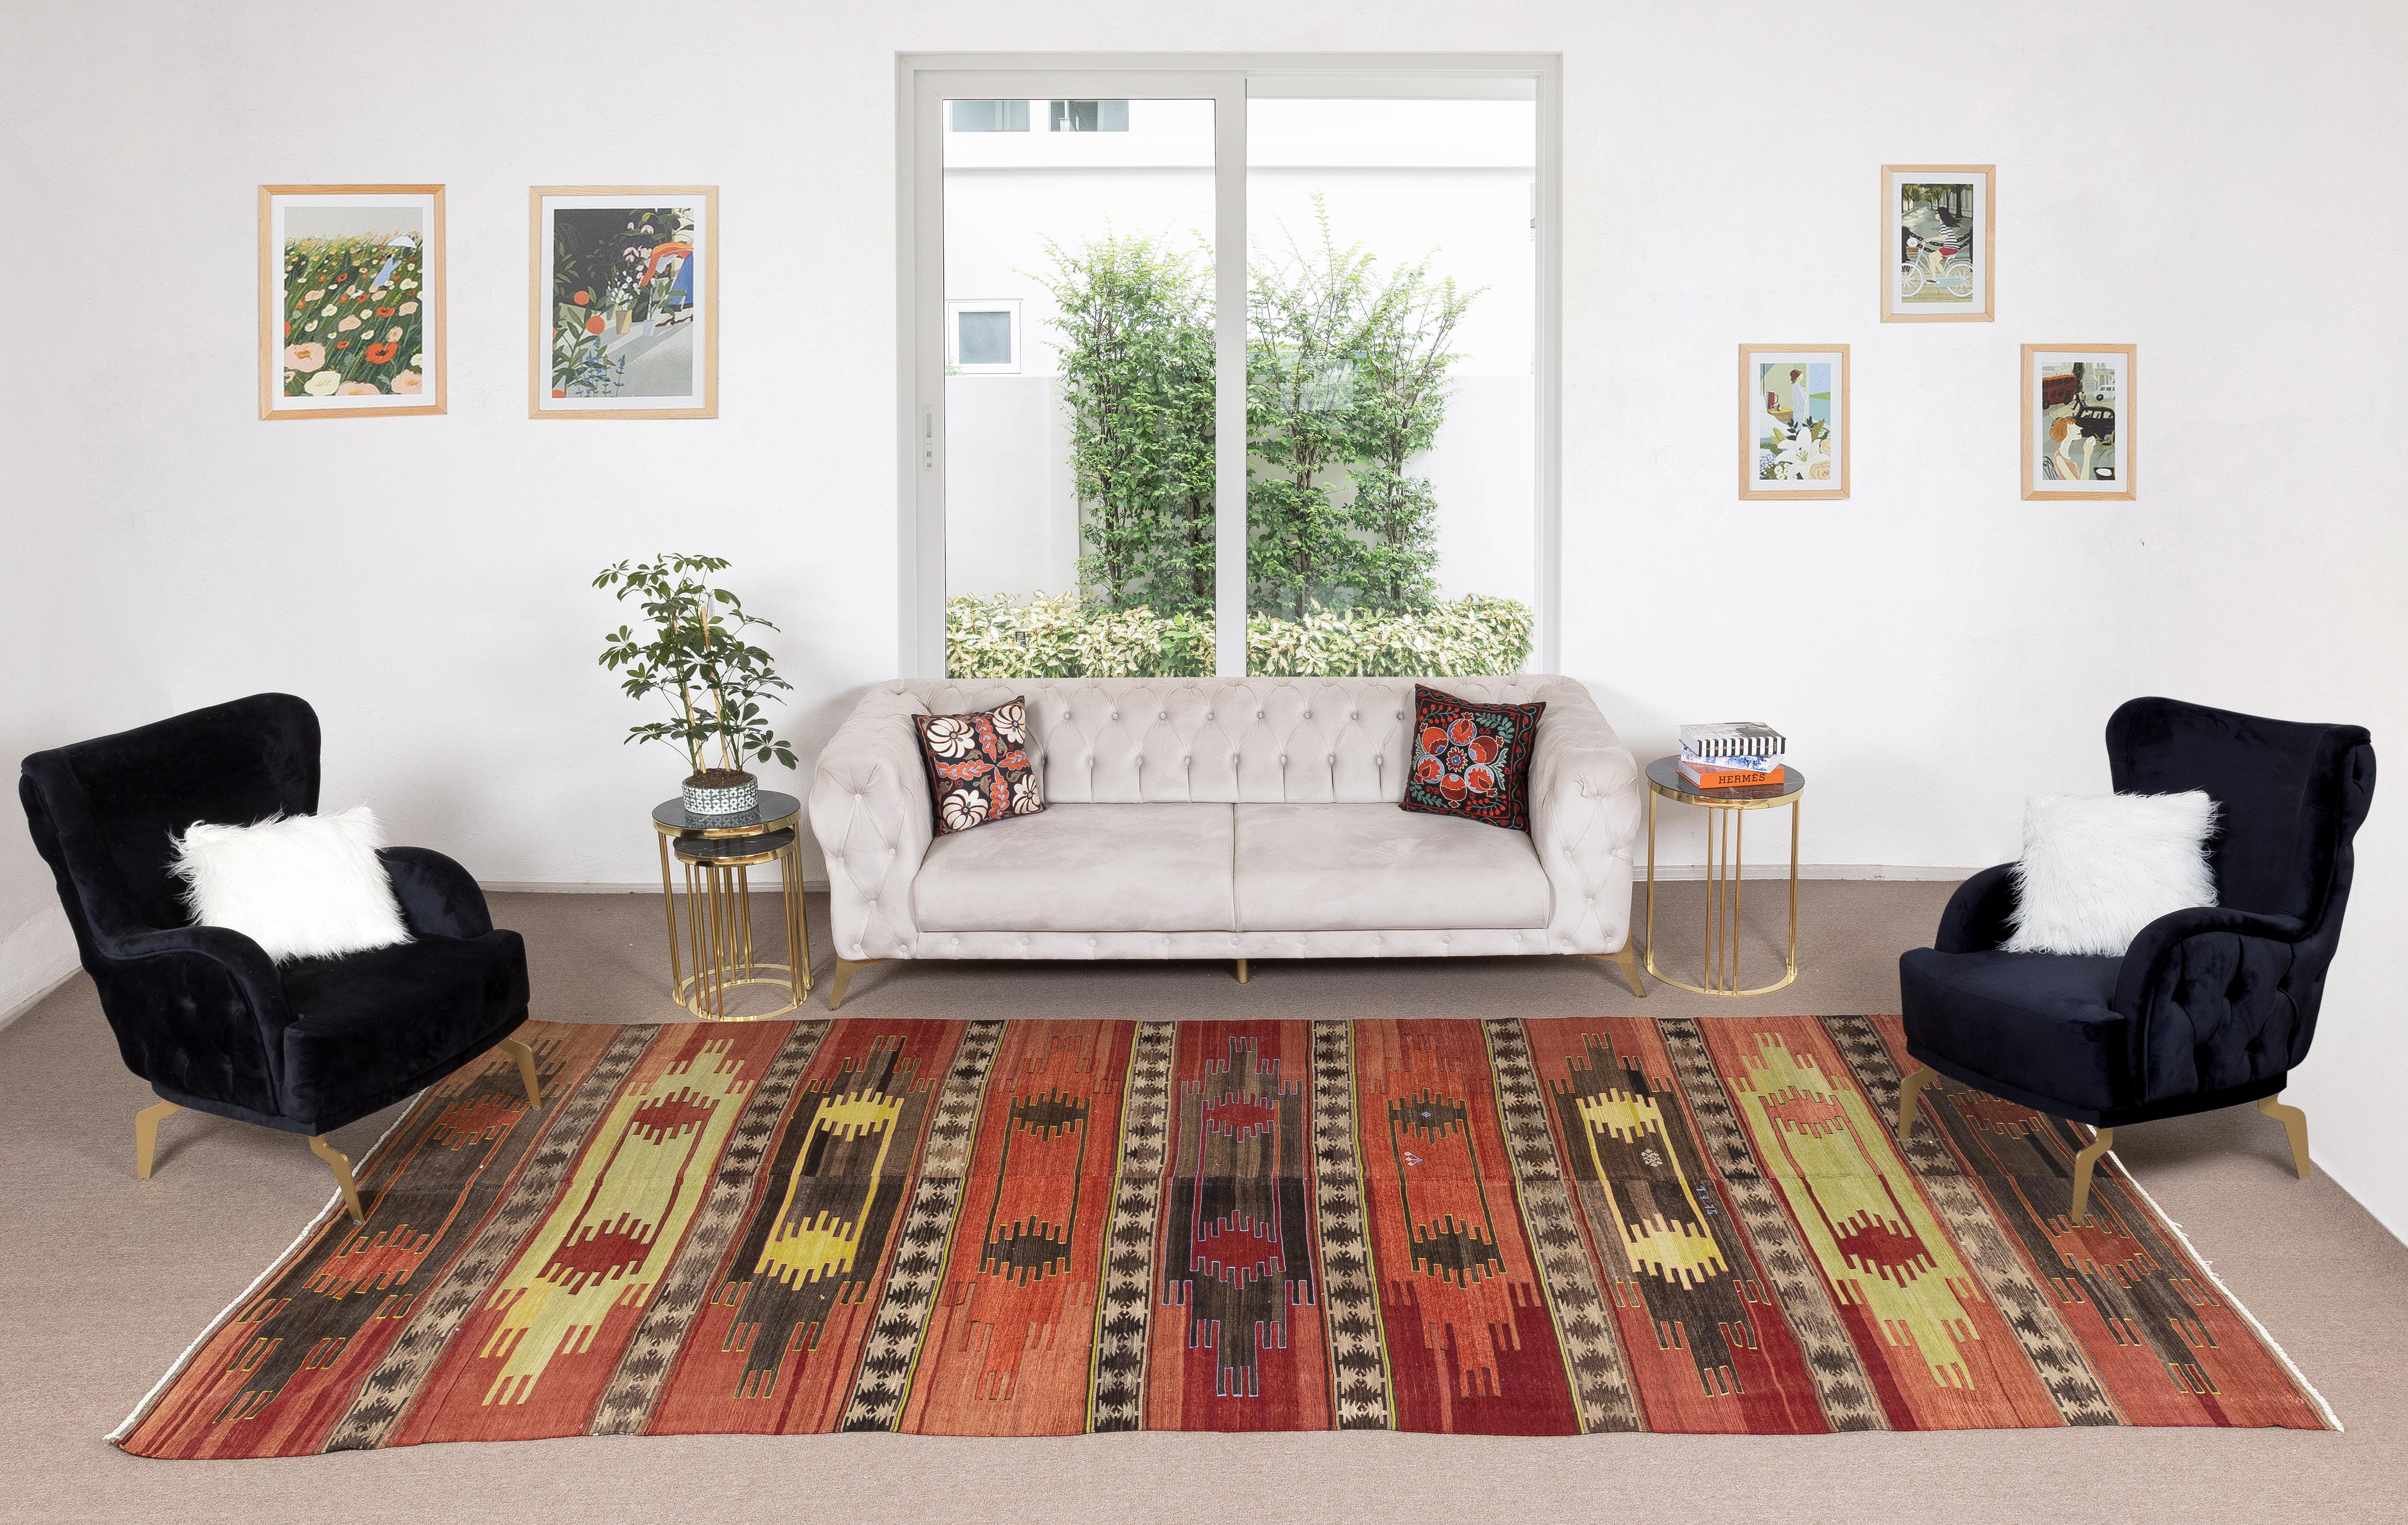 This authentic hand-woven rug made to be used by the villagers in Central Anatolia. 100% Organic wool. 
Good condition and cleaned professionally. Measures: 6.4x14 ft.
Ideal for both residential and commercial interiors.
We can supply a suitable